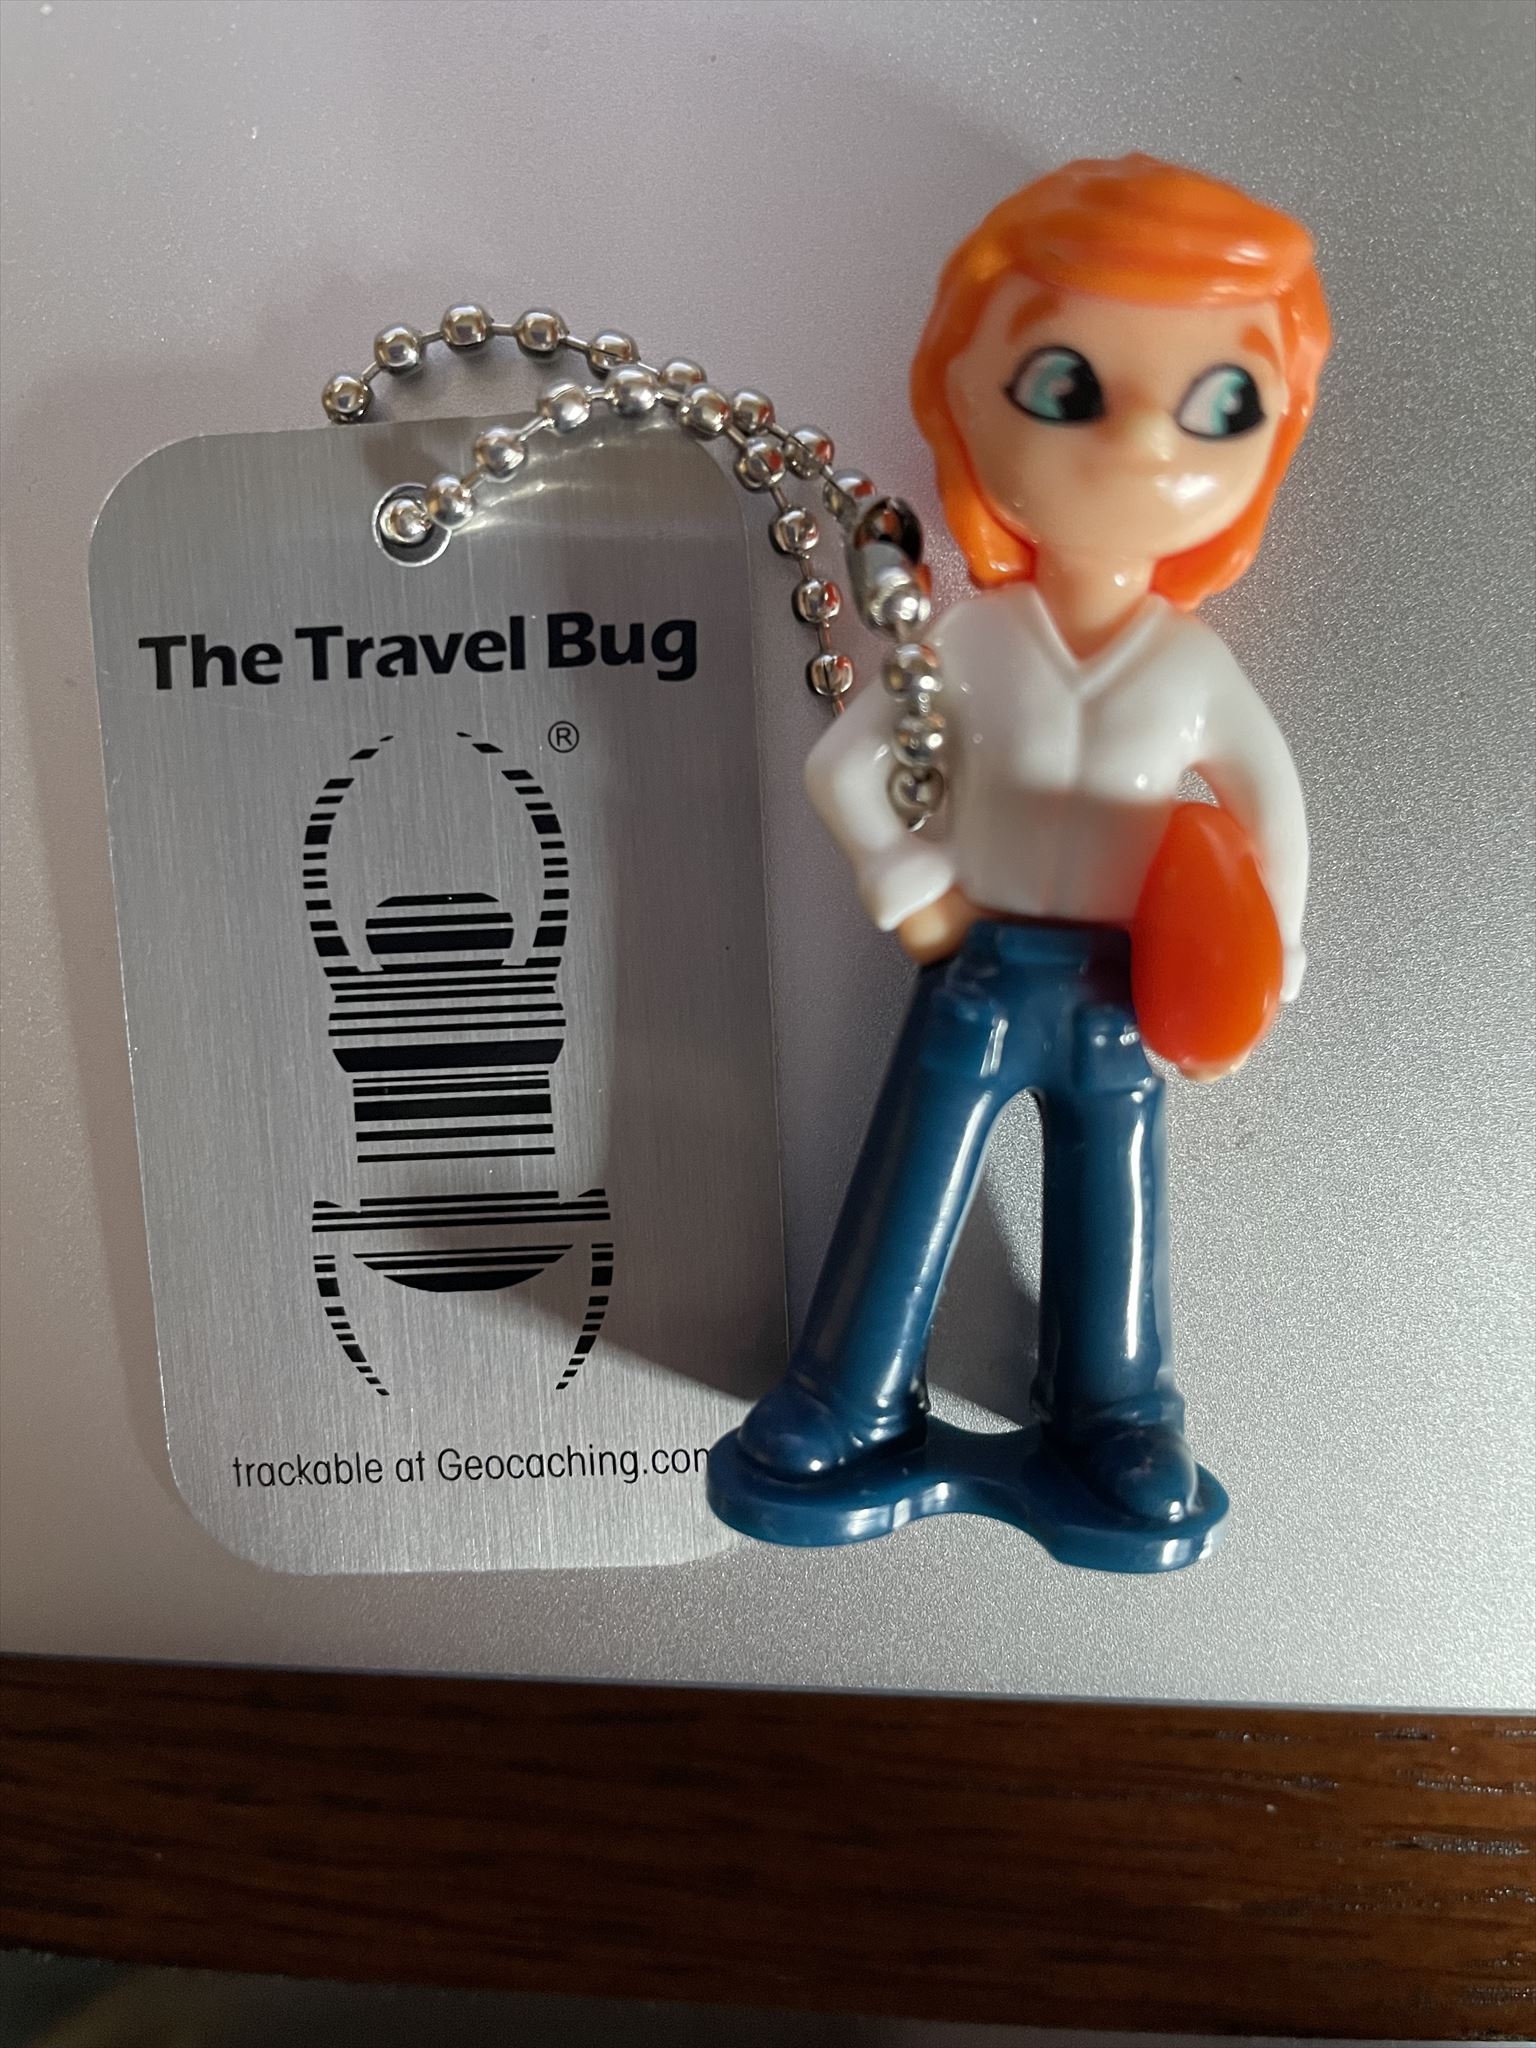 Carina the Explorer is a rectangular metal travel tag with attached small plastic female figure with red hair and blue jeans